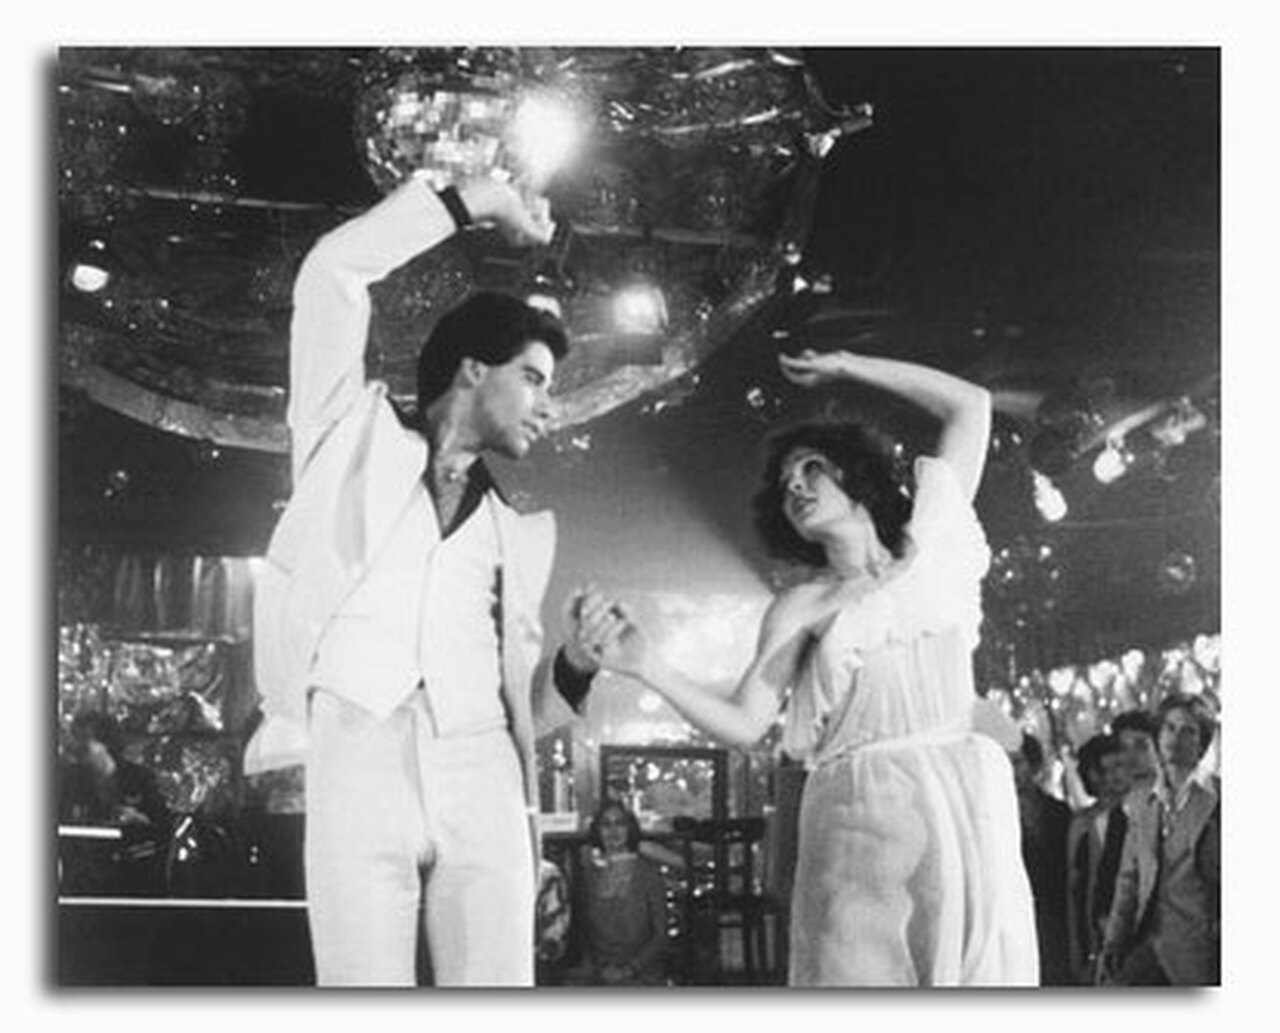 SS2292095) Movie picture of Saturday Night Fever buy celebrity photo and posters at Starstills.com